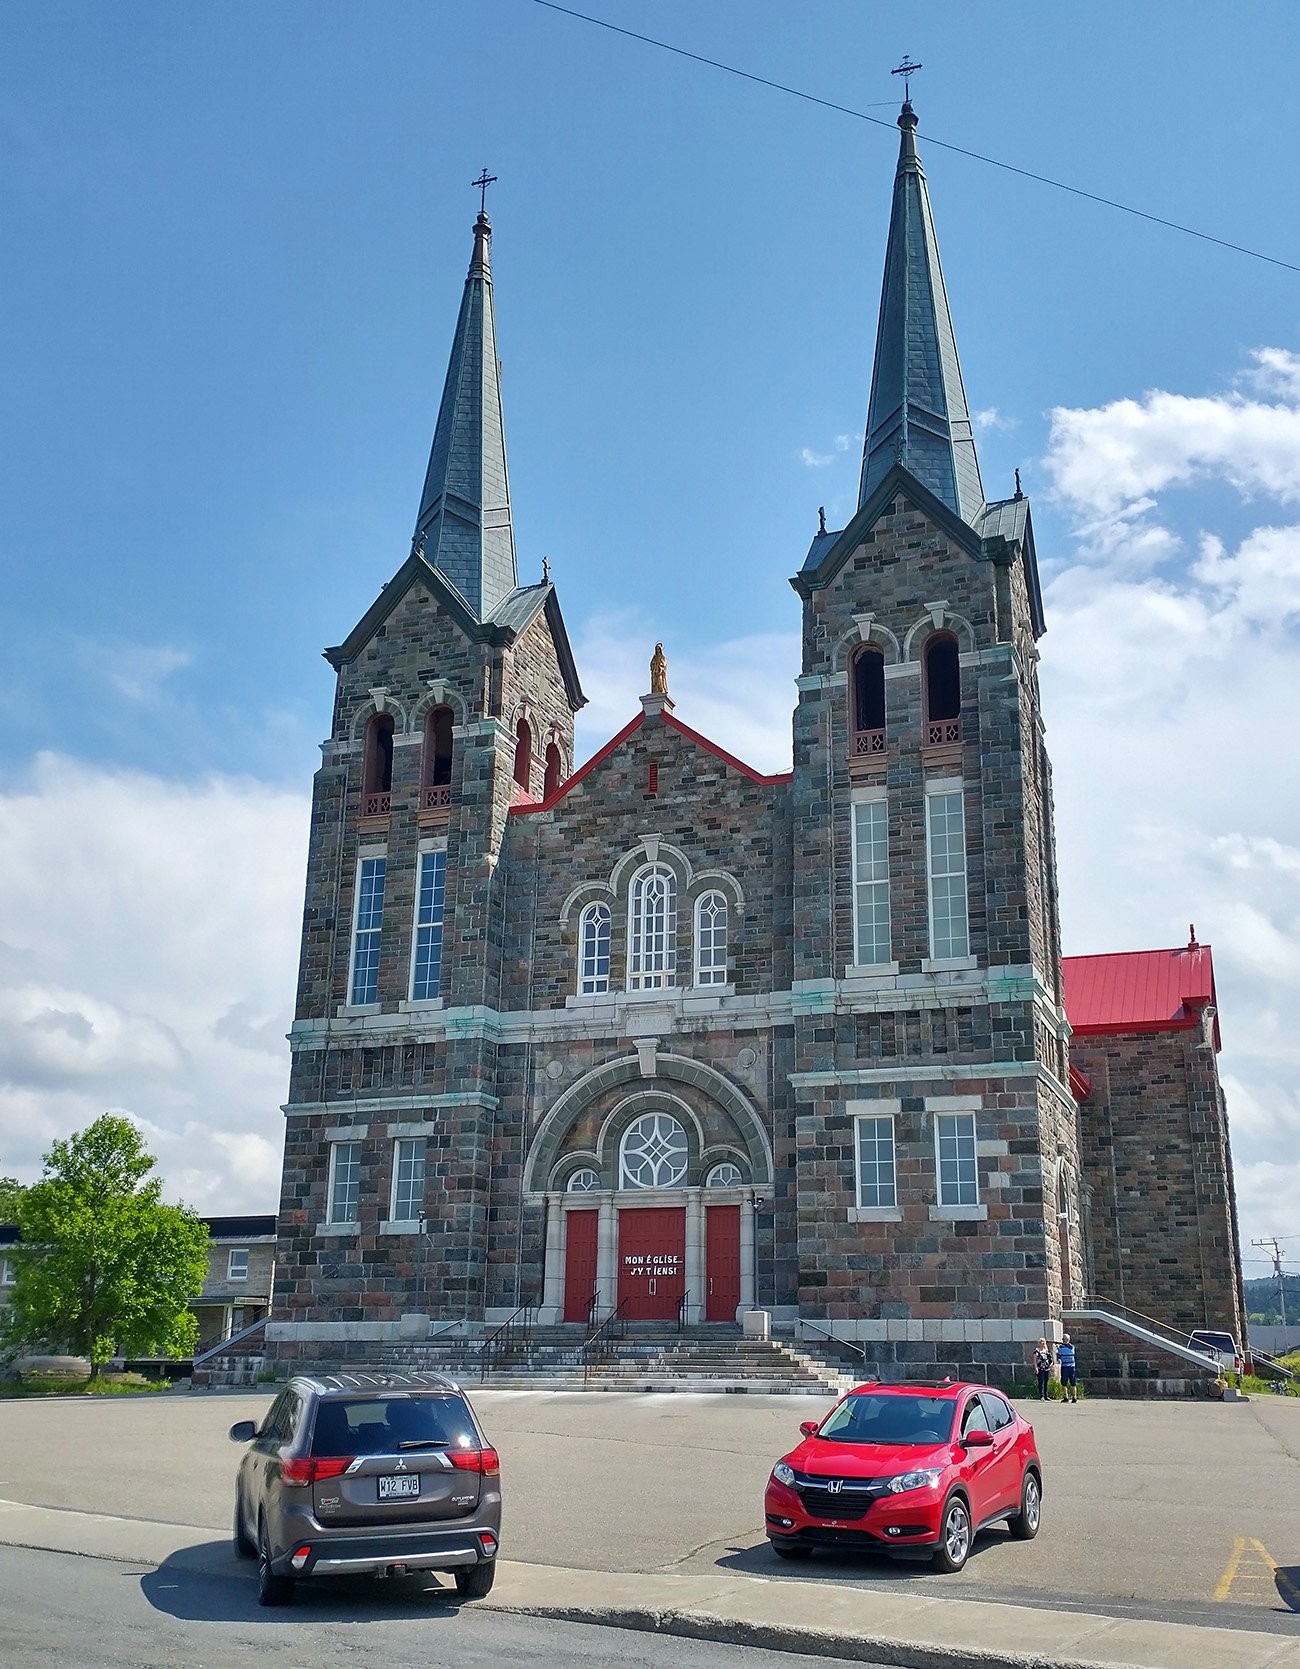 Town has an iconic red cathedral.